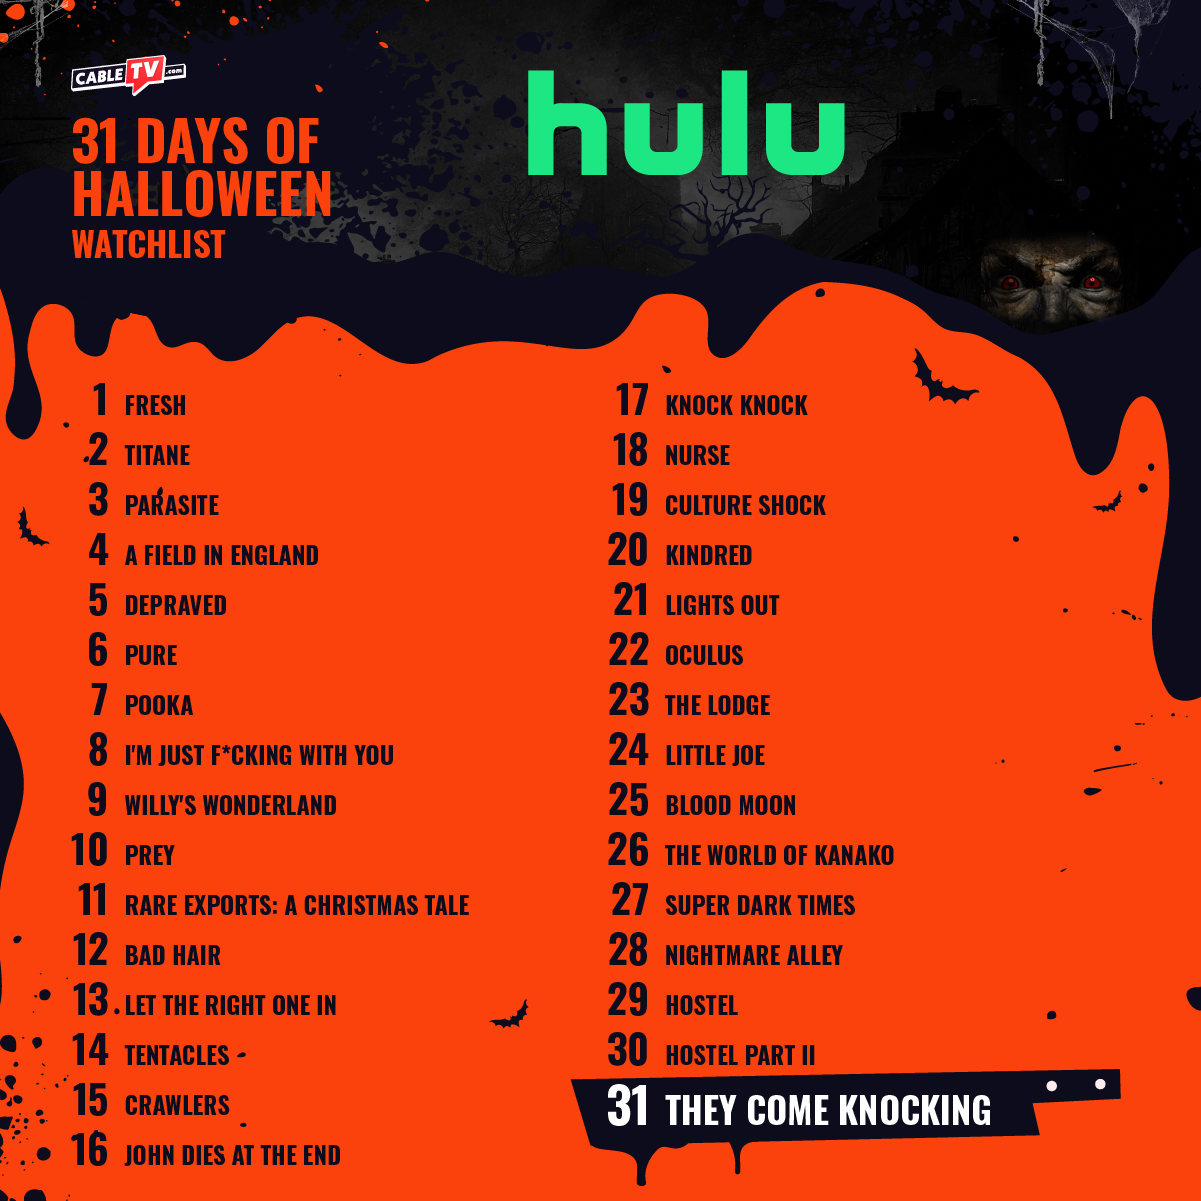 List of 31 horror movies to watch in October on Hulu